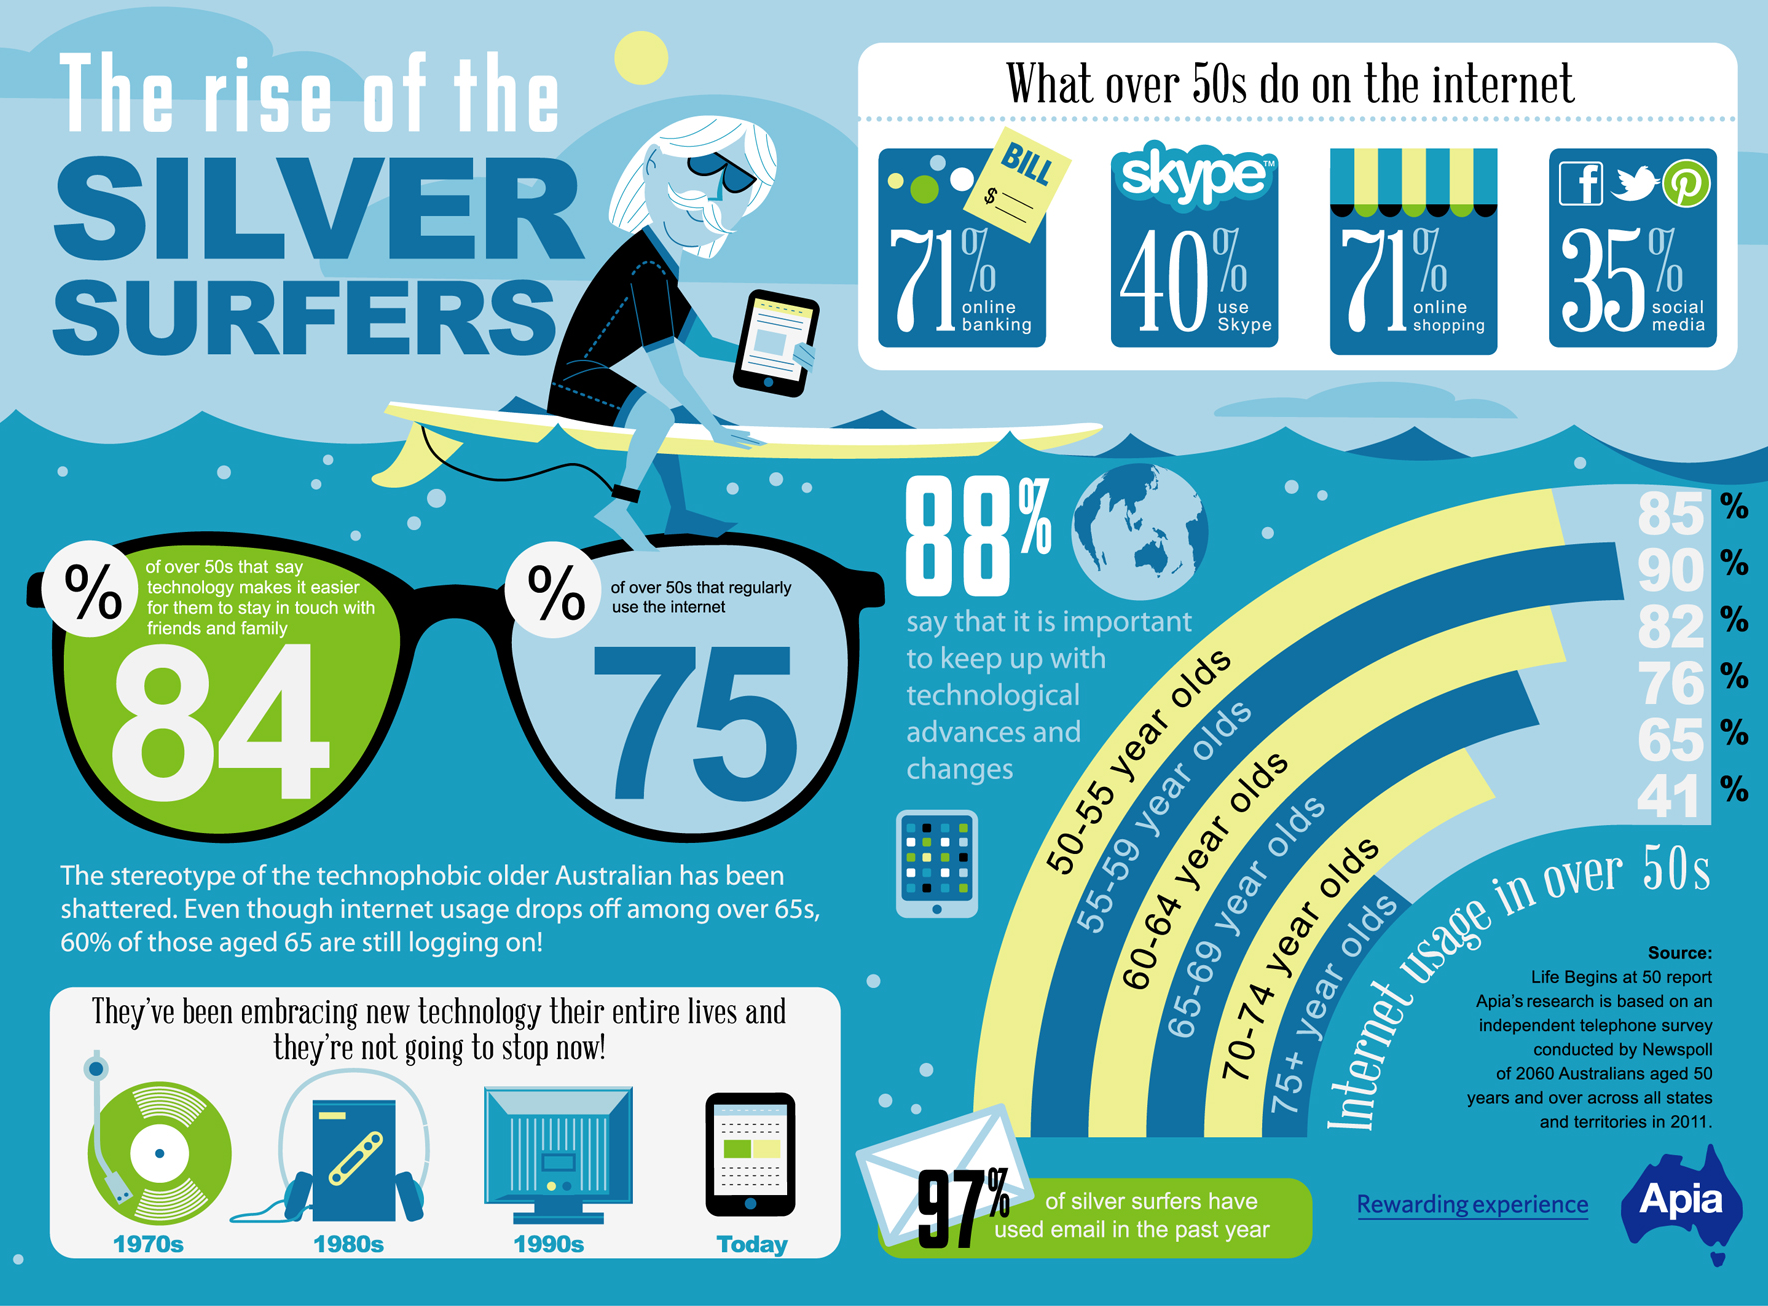 Rise of Silver Surfers - What Do Over 50s Do On The Internet? - Infographic